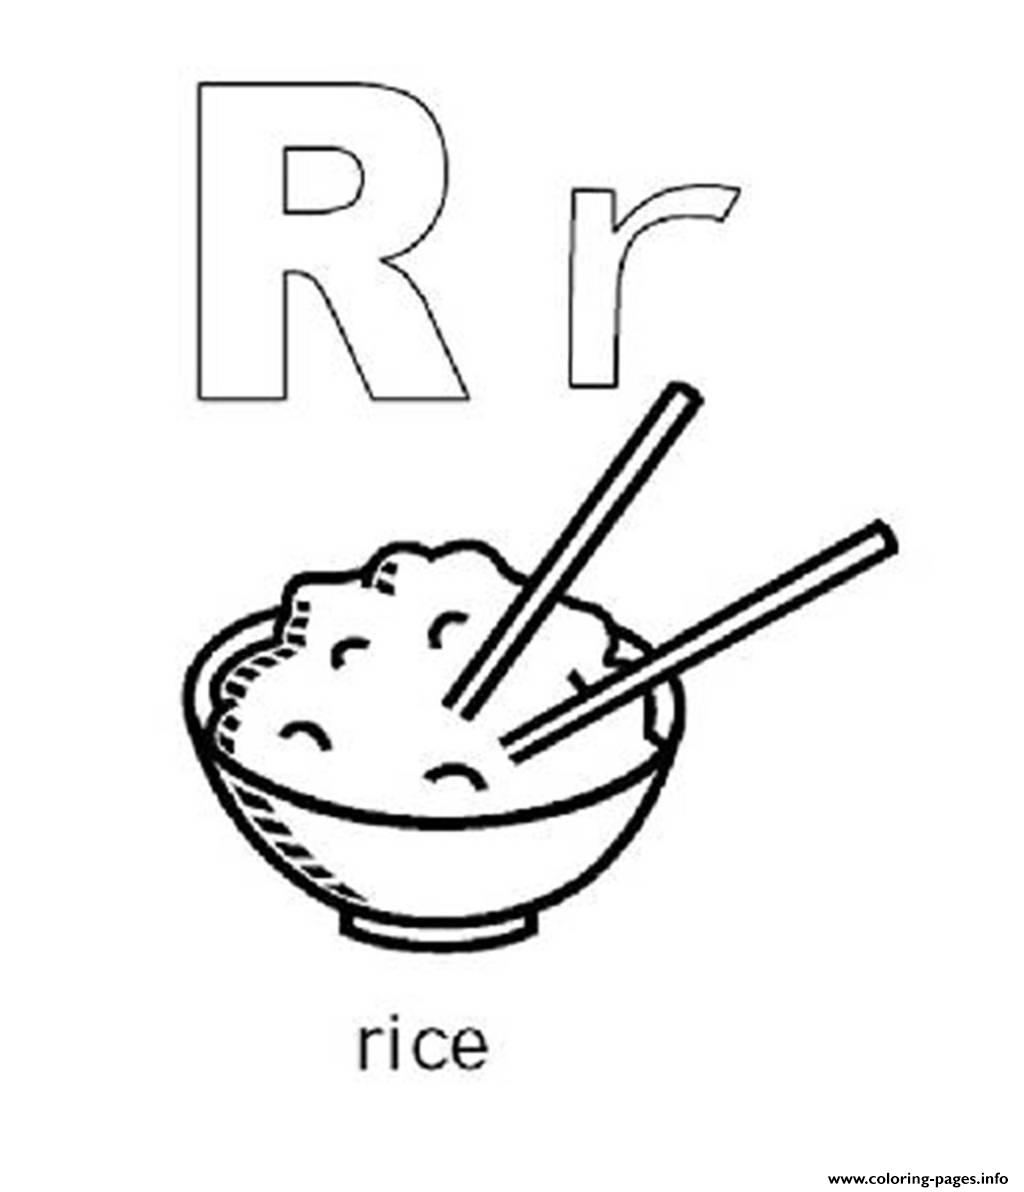 Rice Free Alphabet S4eea Coloring Pages Printable